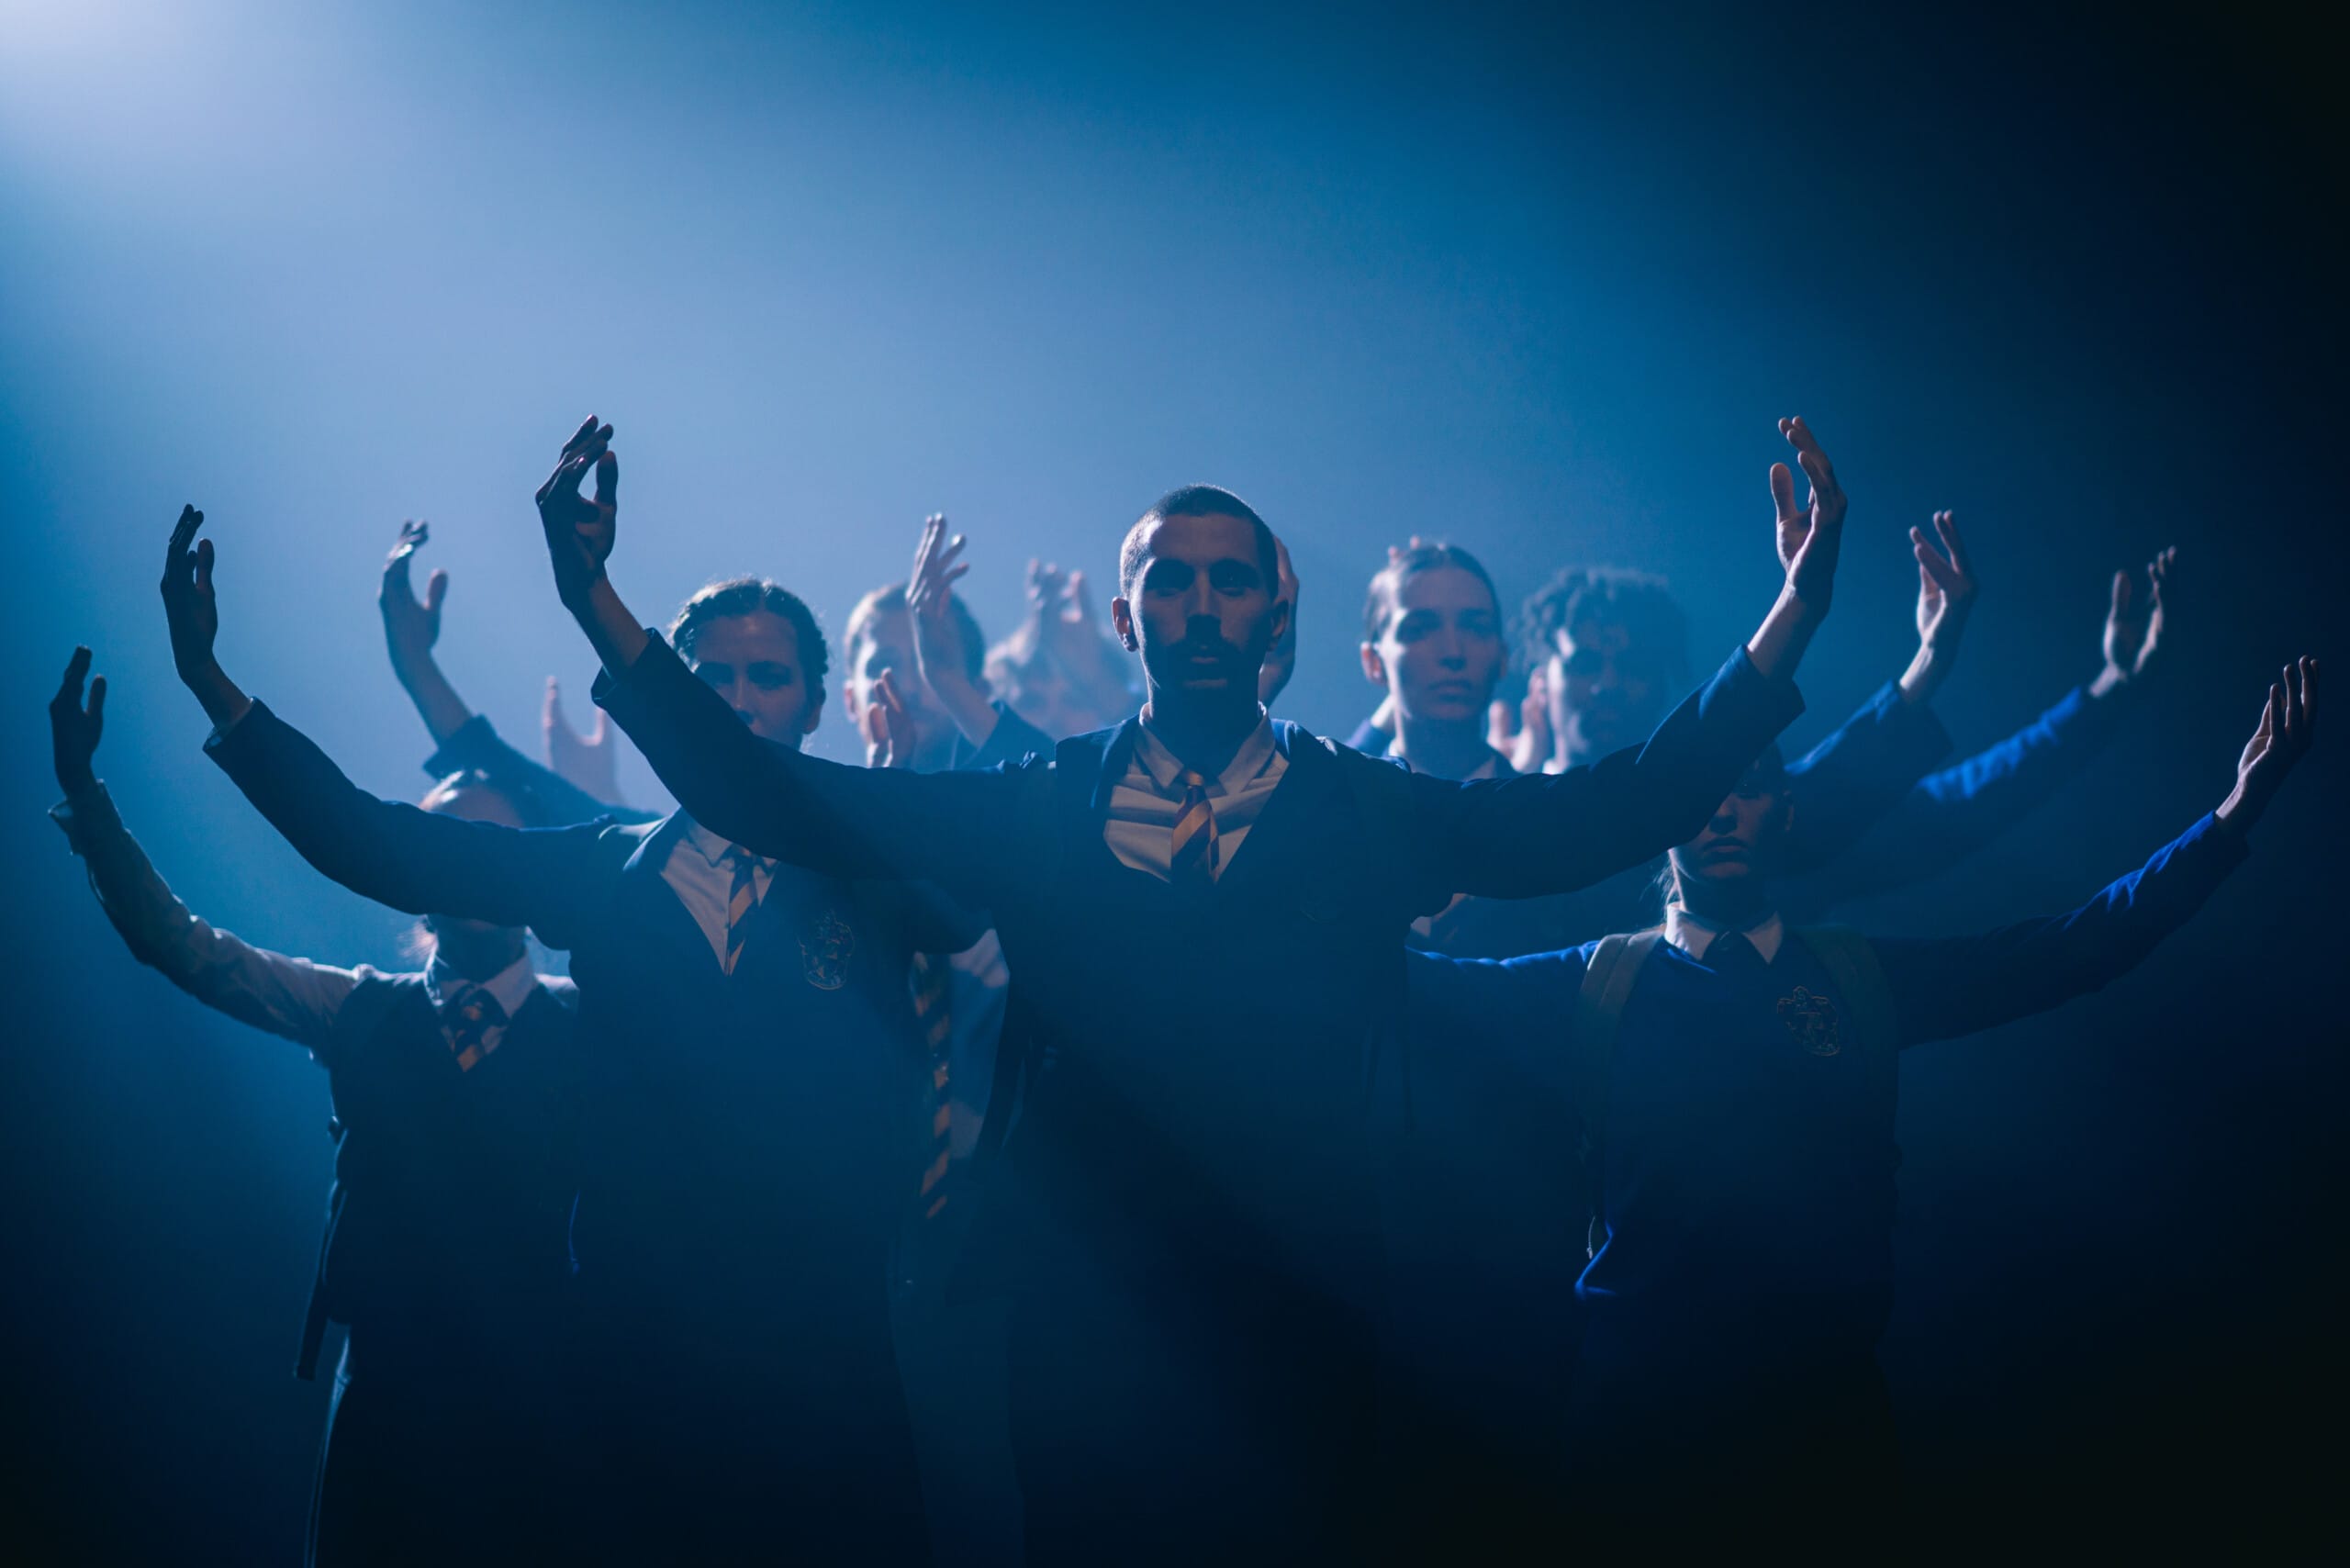 Dramatic blue lighting casts a shadow over the ensemble performers in Shechter II. All dancers pose with both arms raised in the air in a crescent position.